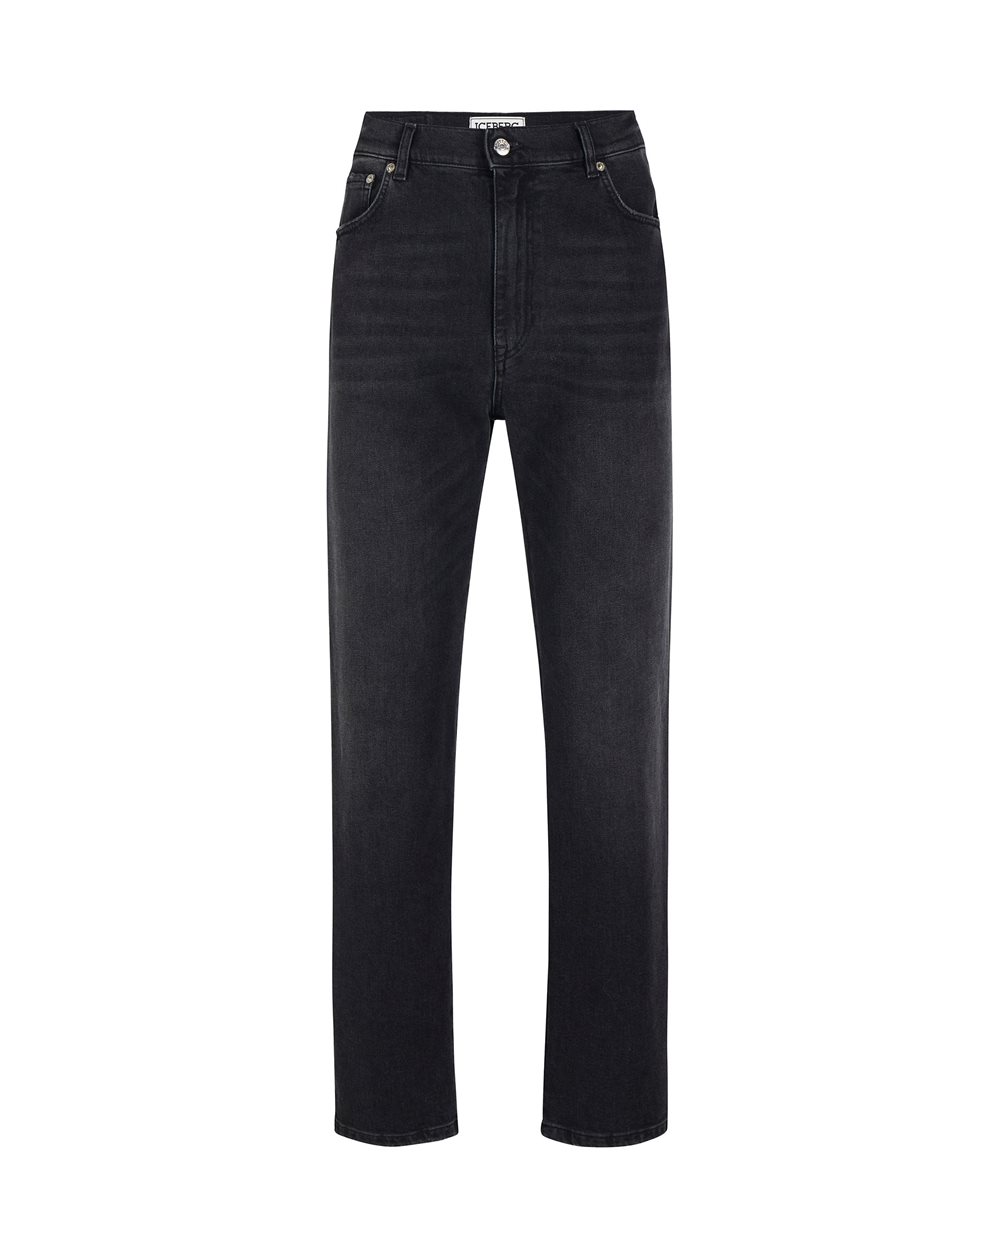 Black jeans with logo - Trousers | Iceberg - Official Website